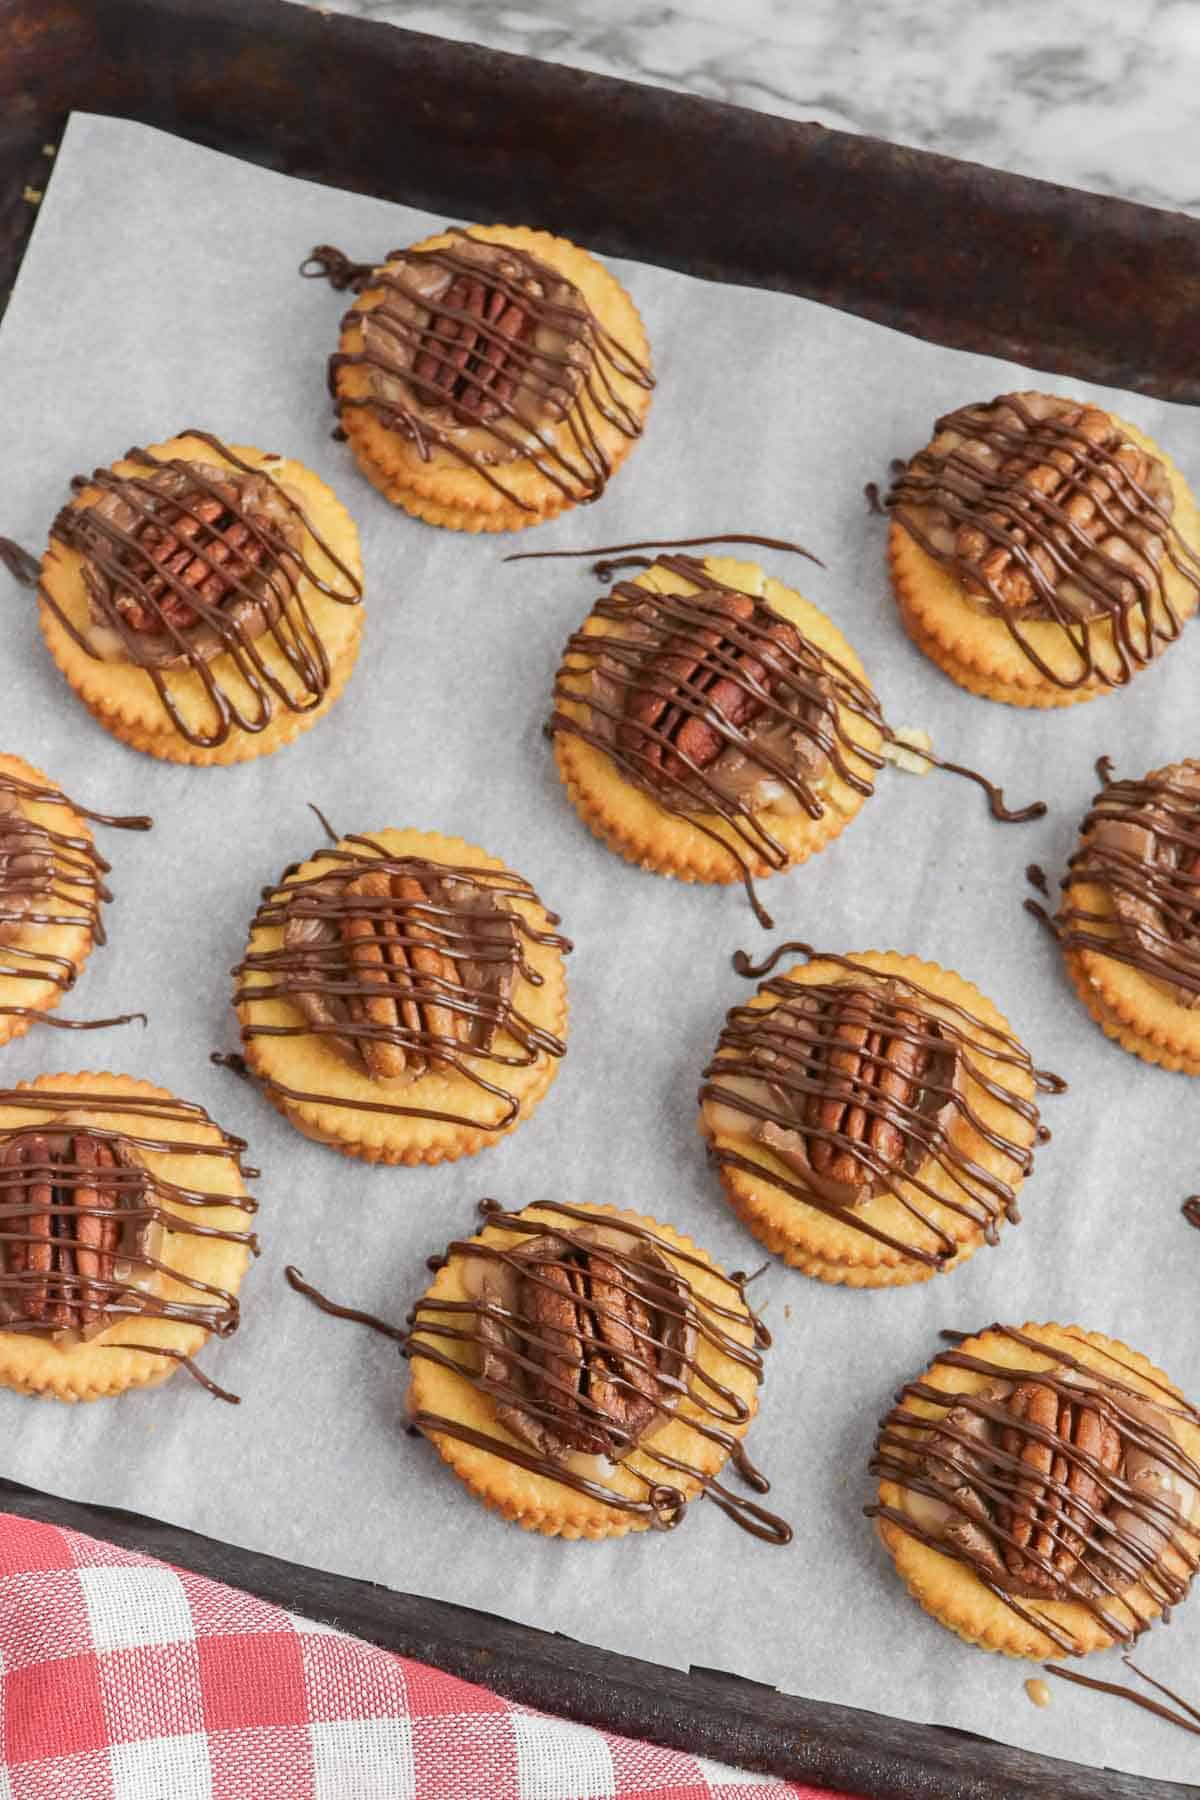 A tray of cookies with chocolate drizzle and pecan halves on them.